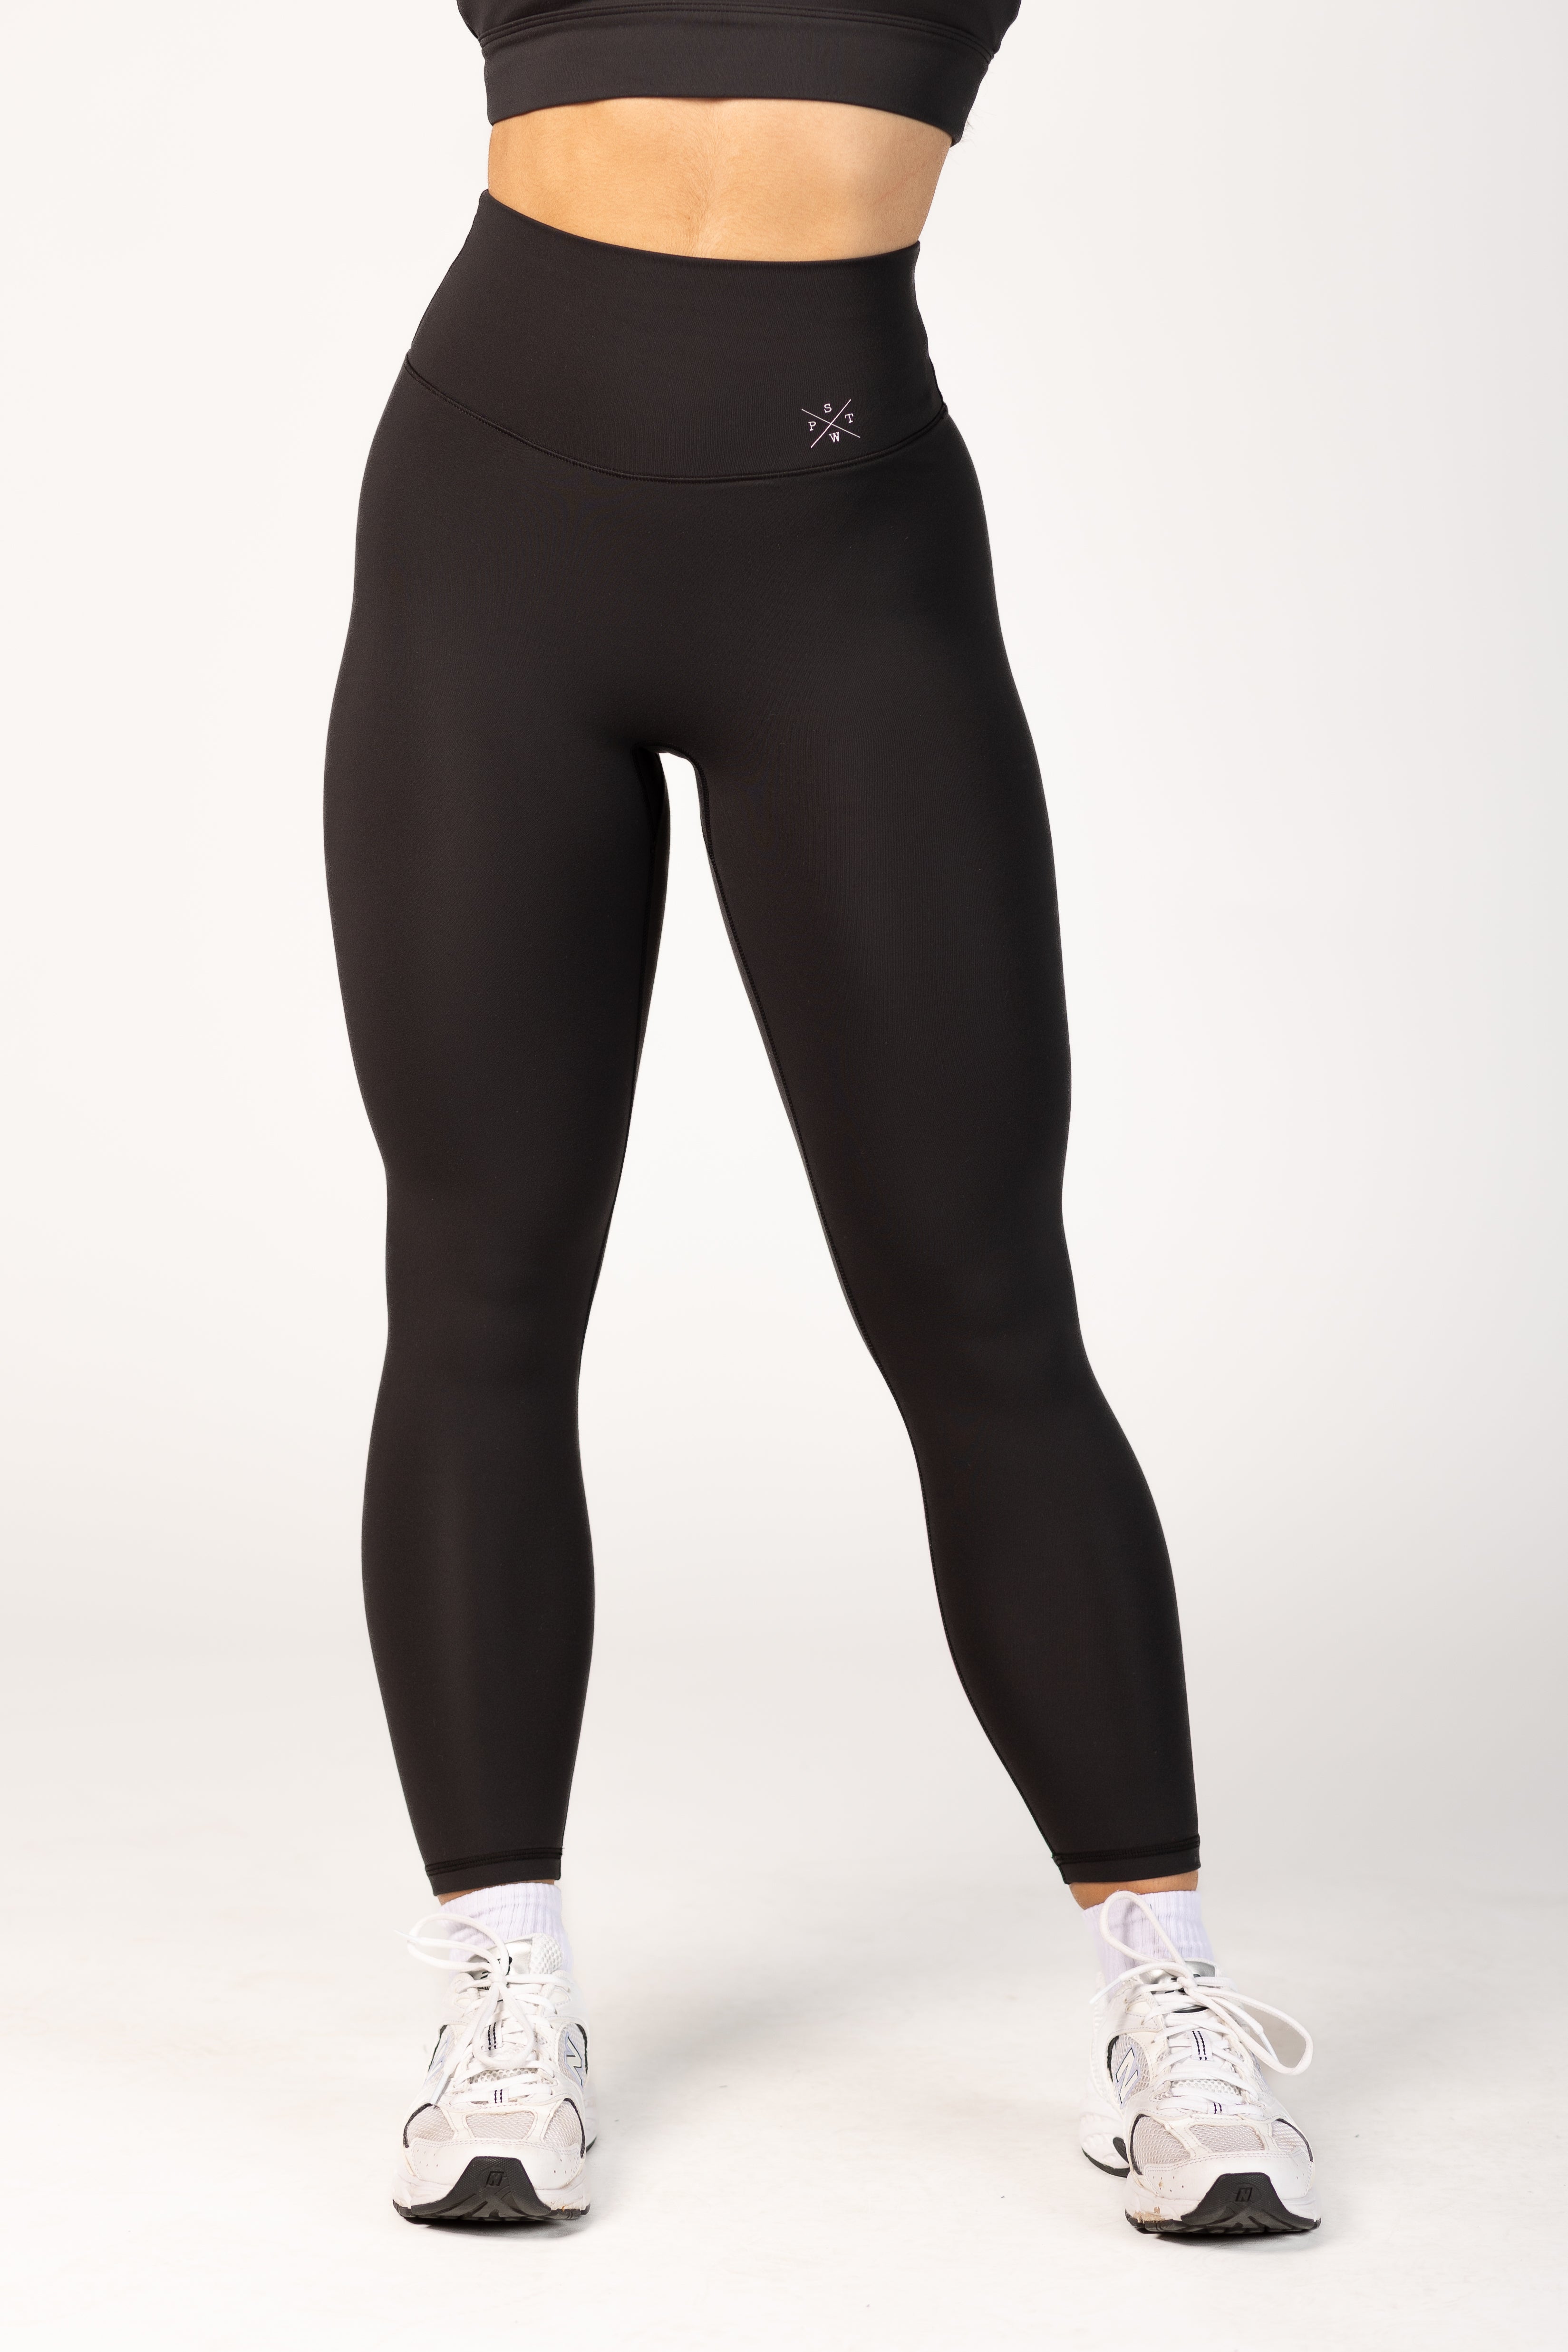 Ptula Active launching September 28th! #activewear #leggings #activew